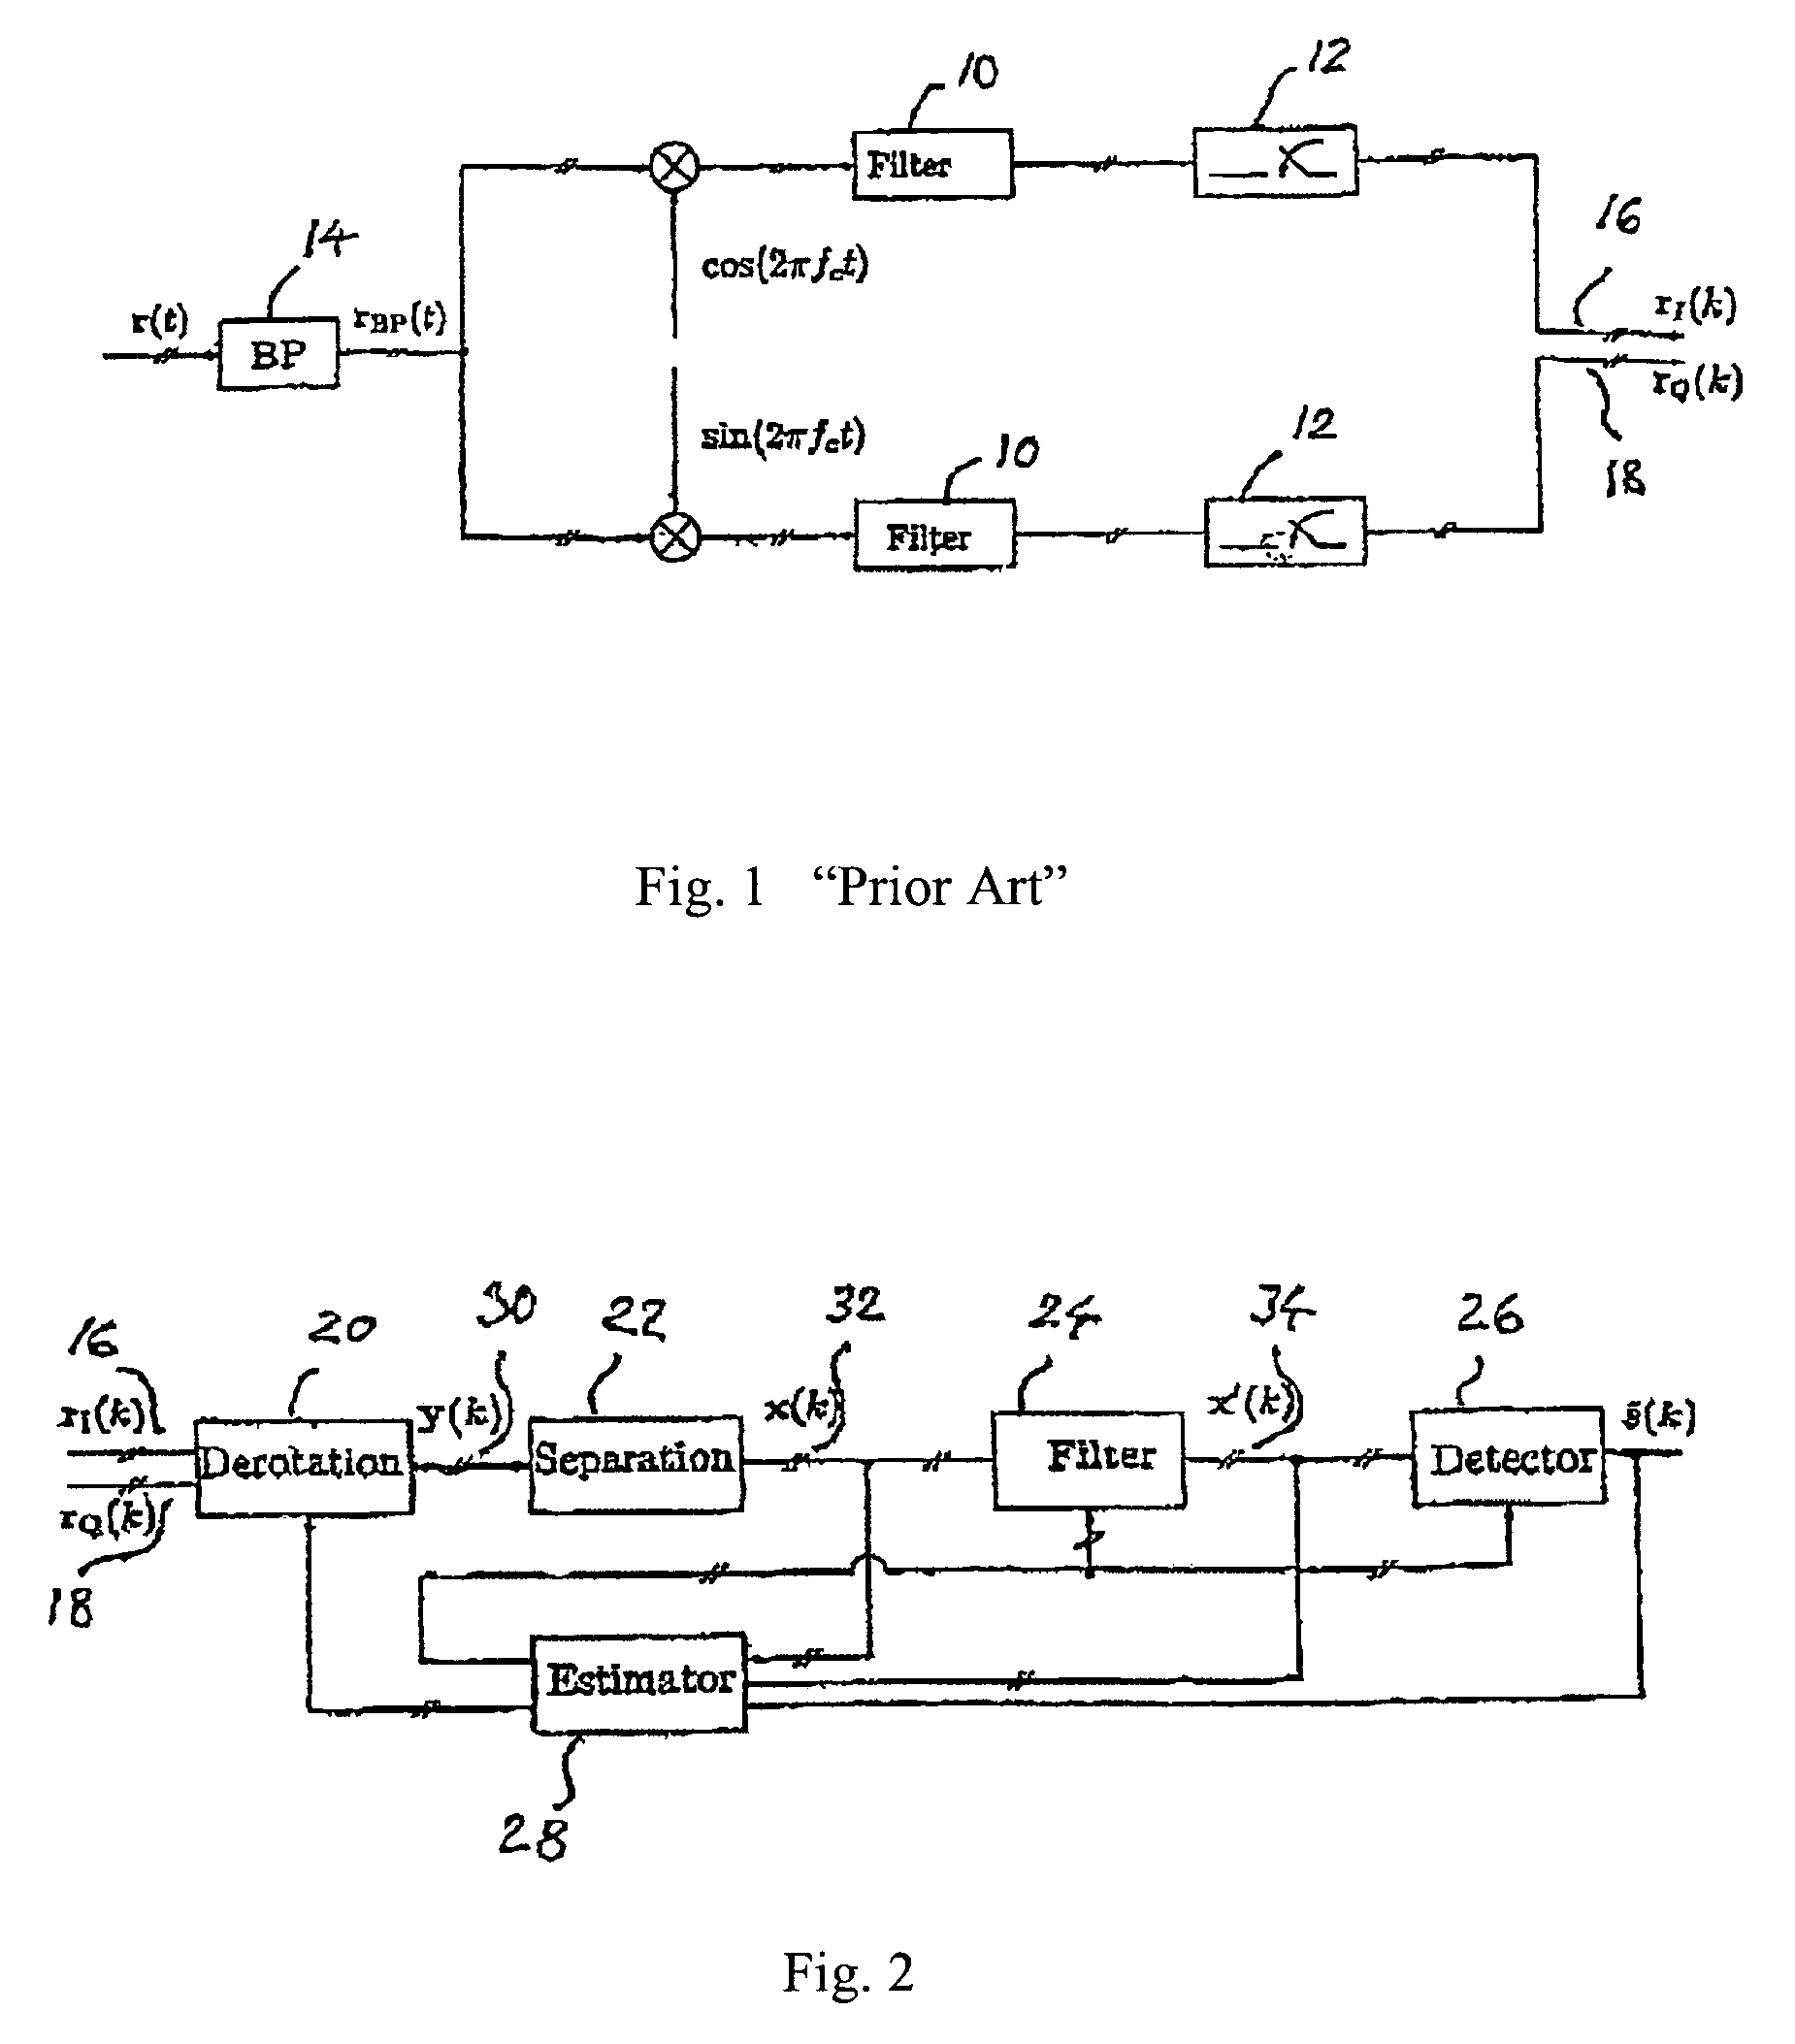 Co-channel interference rejection in a digital receiver